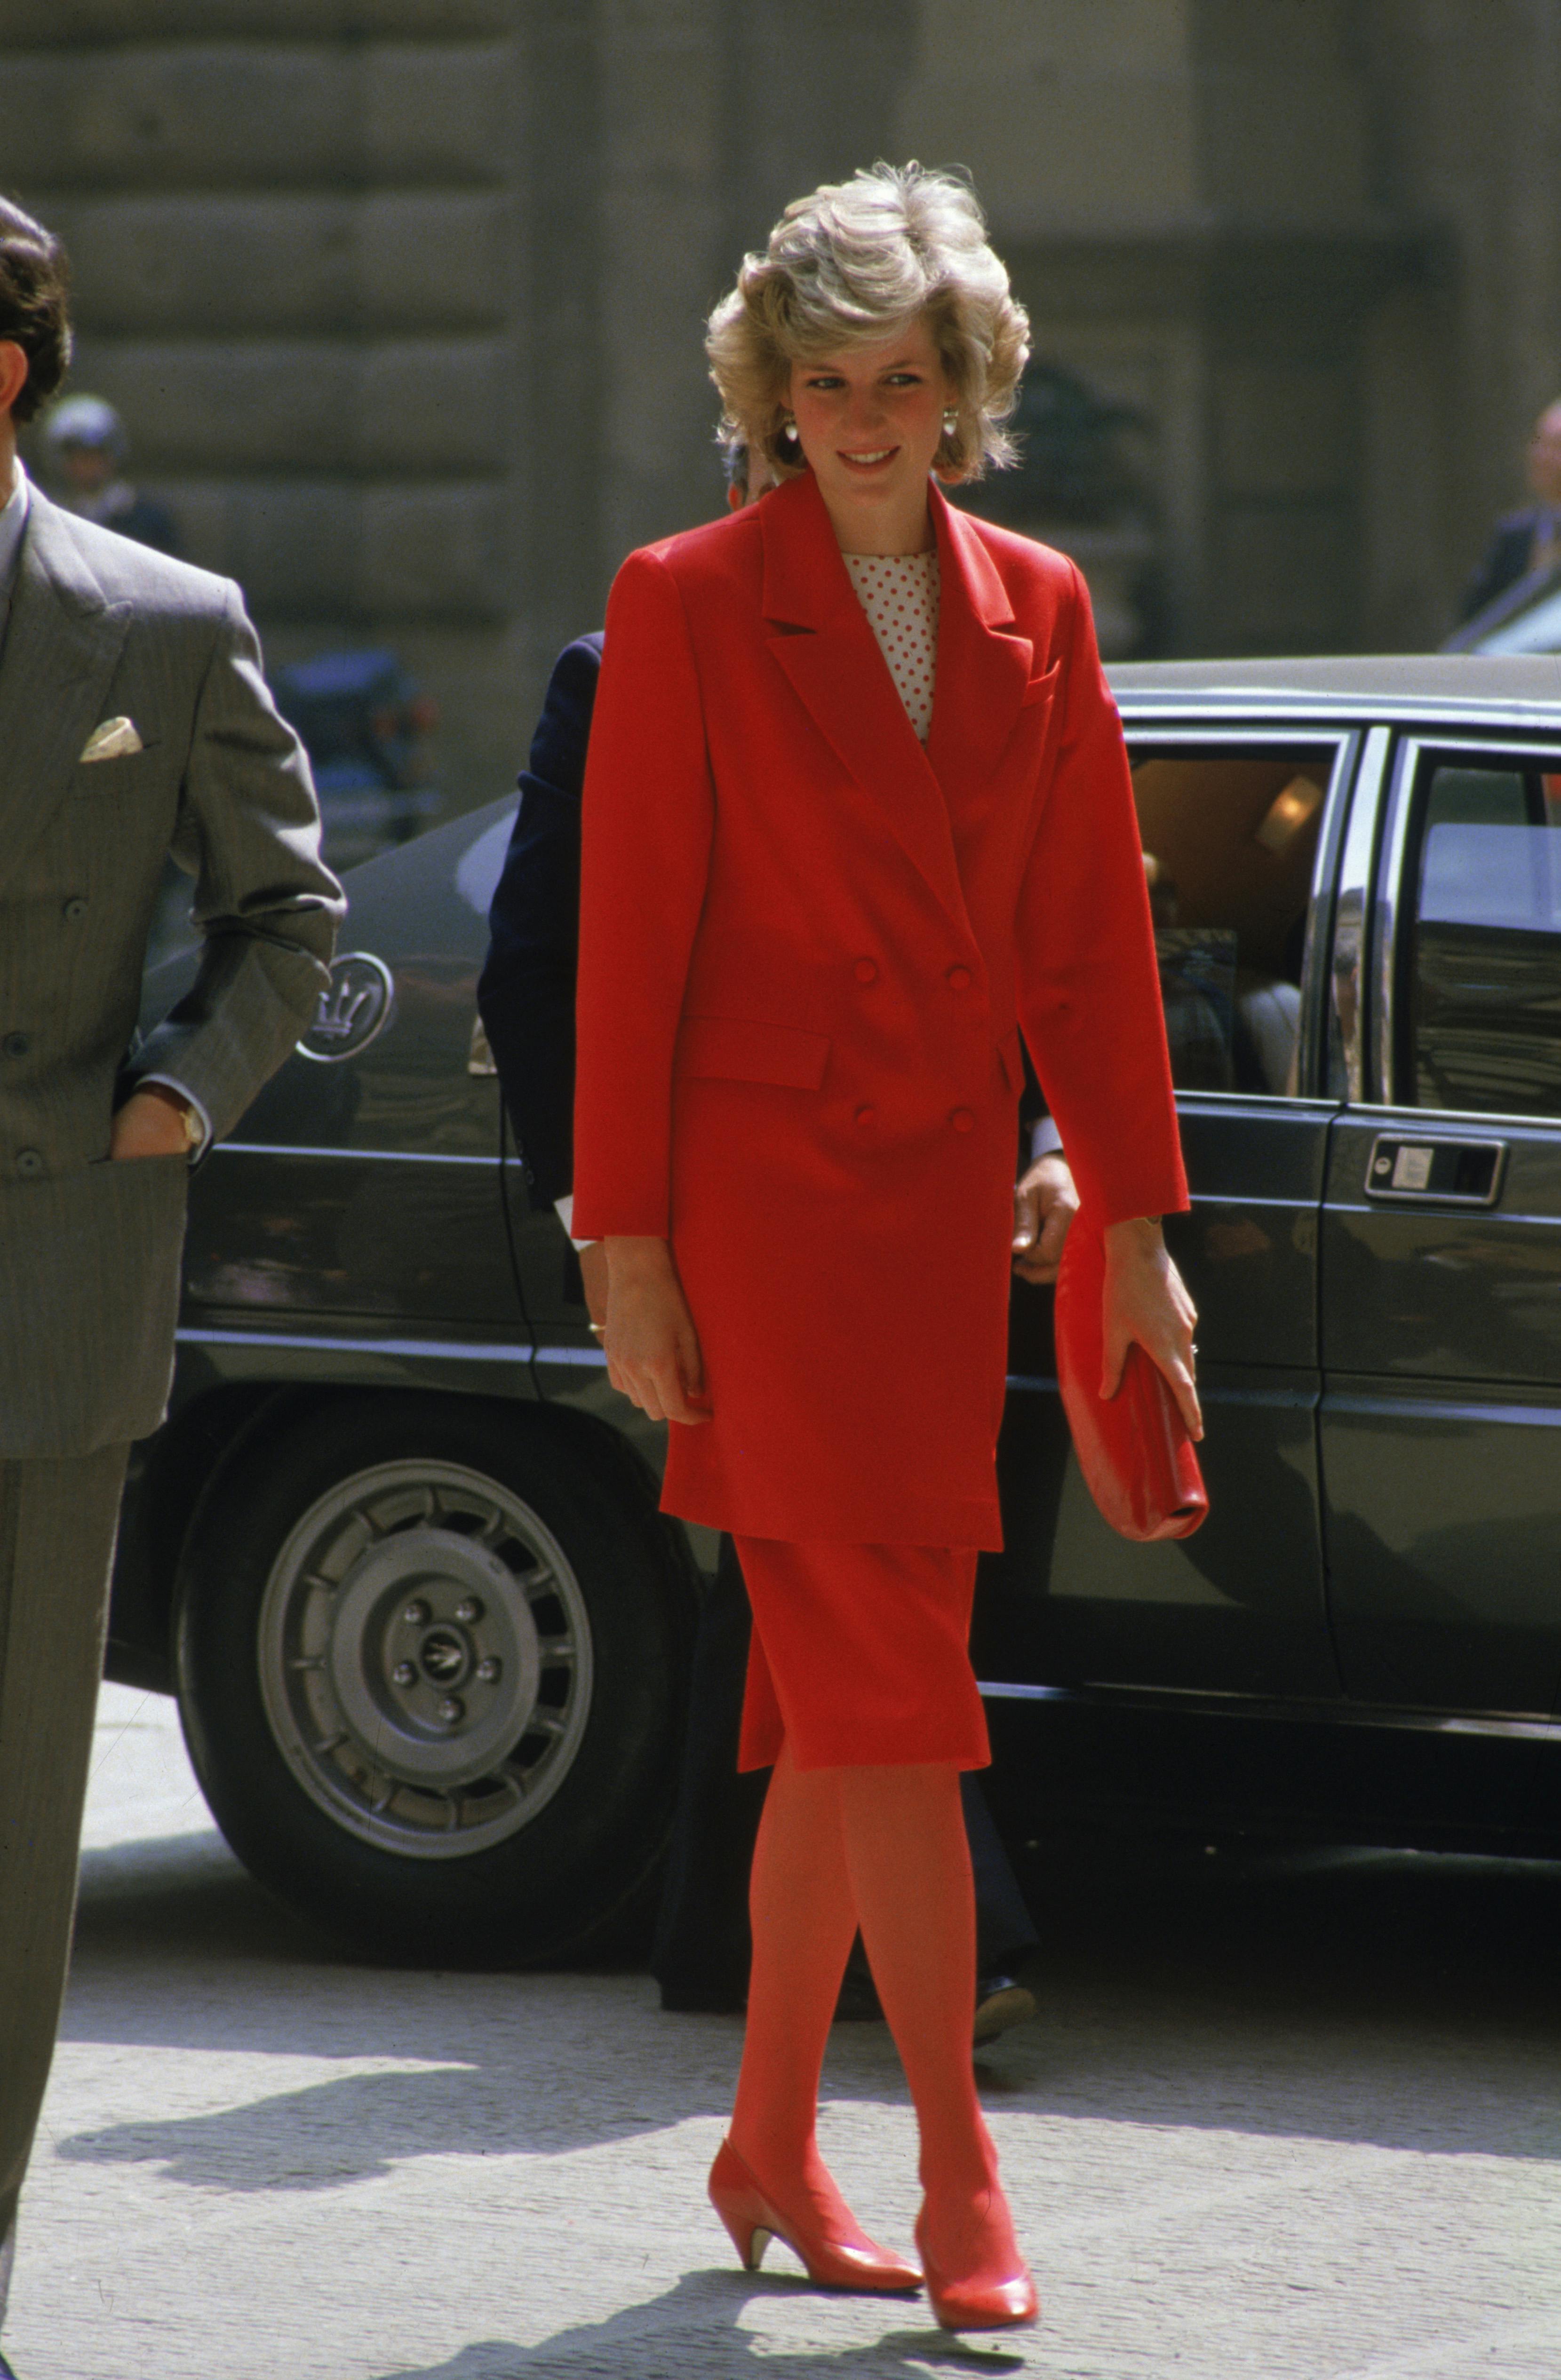 A recap of Princess Diana's most iconic looks | Evening Standard